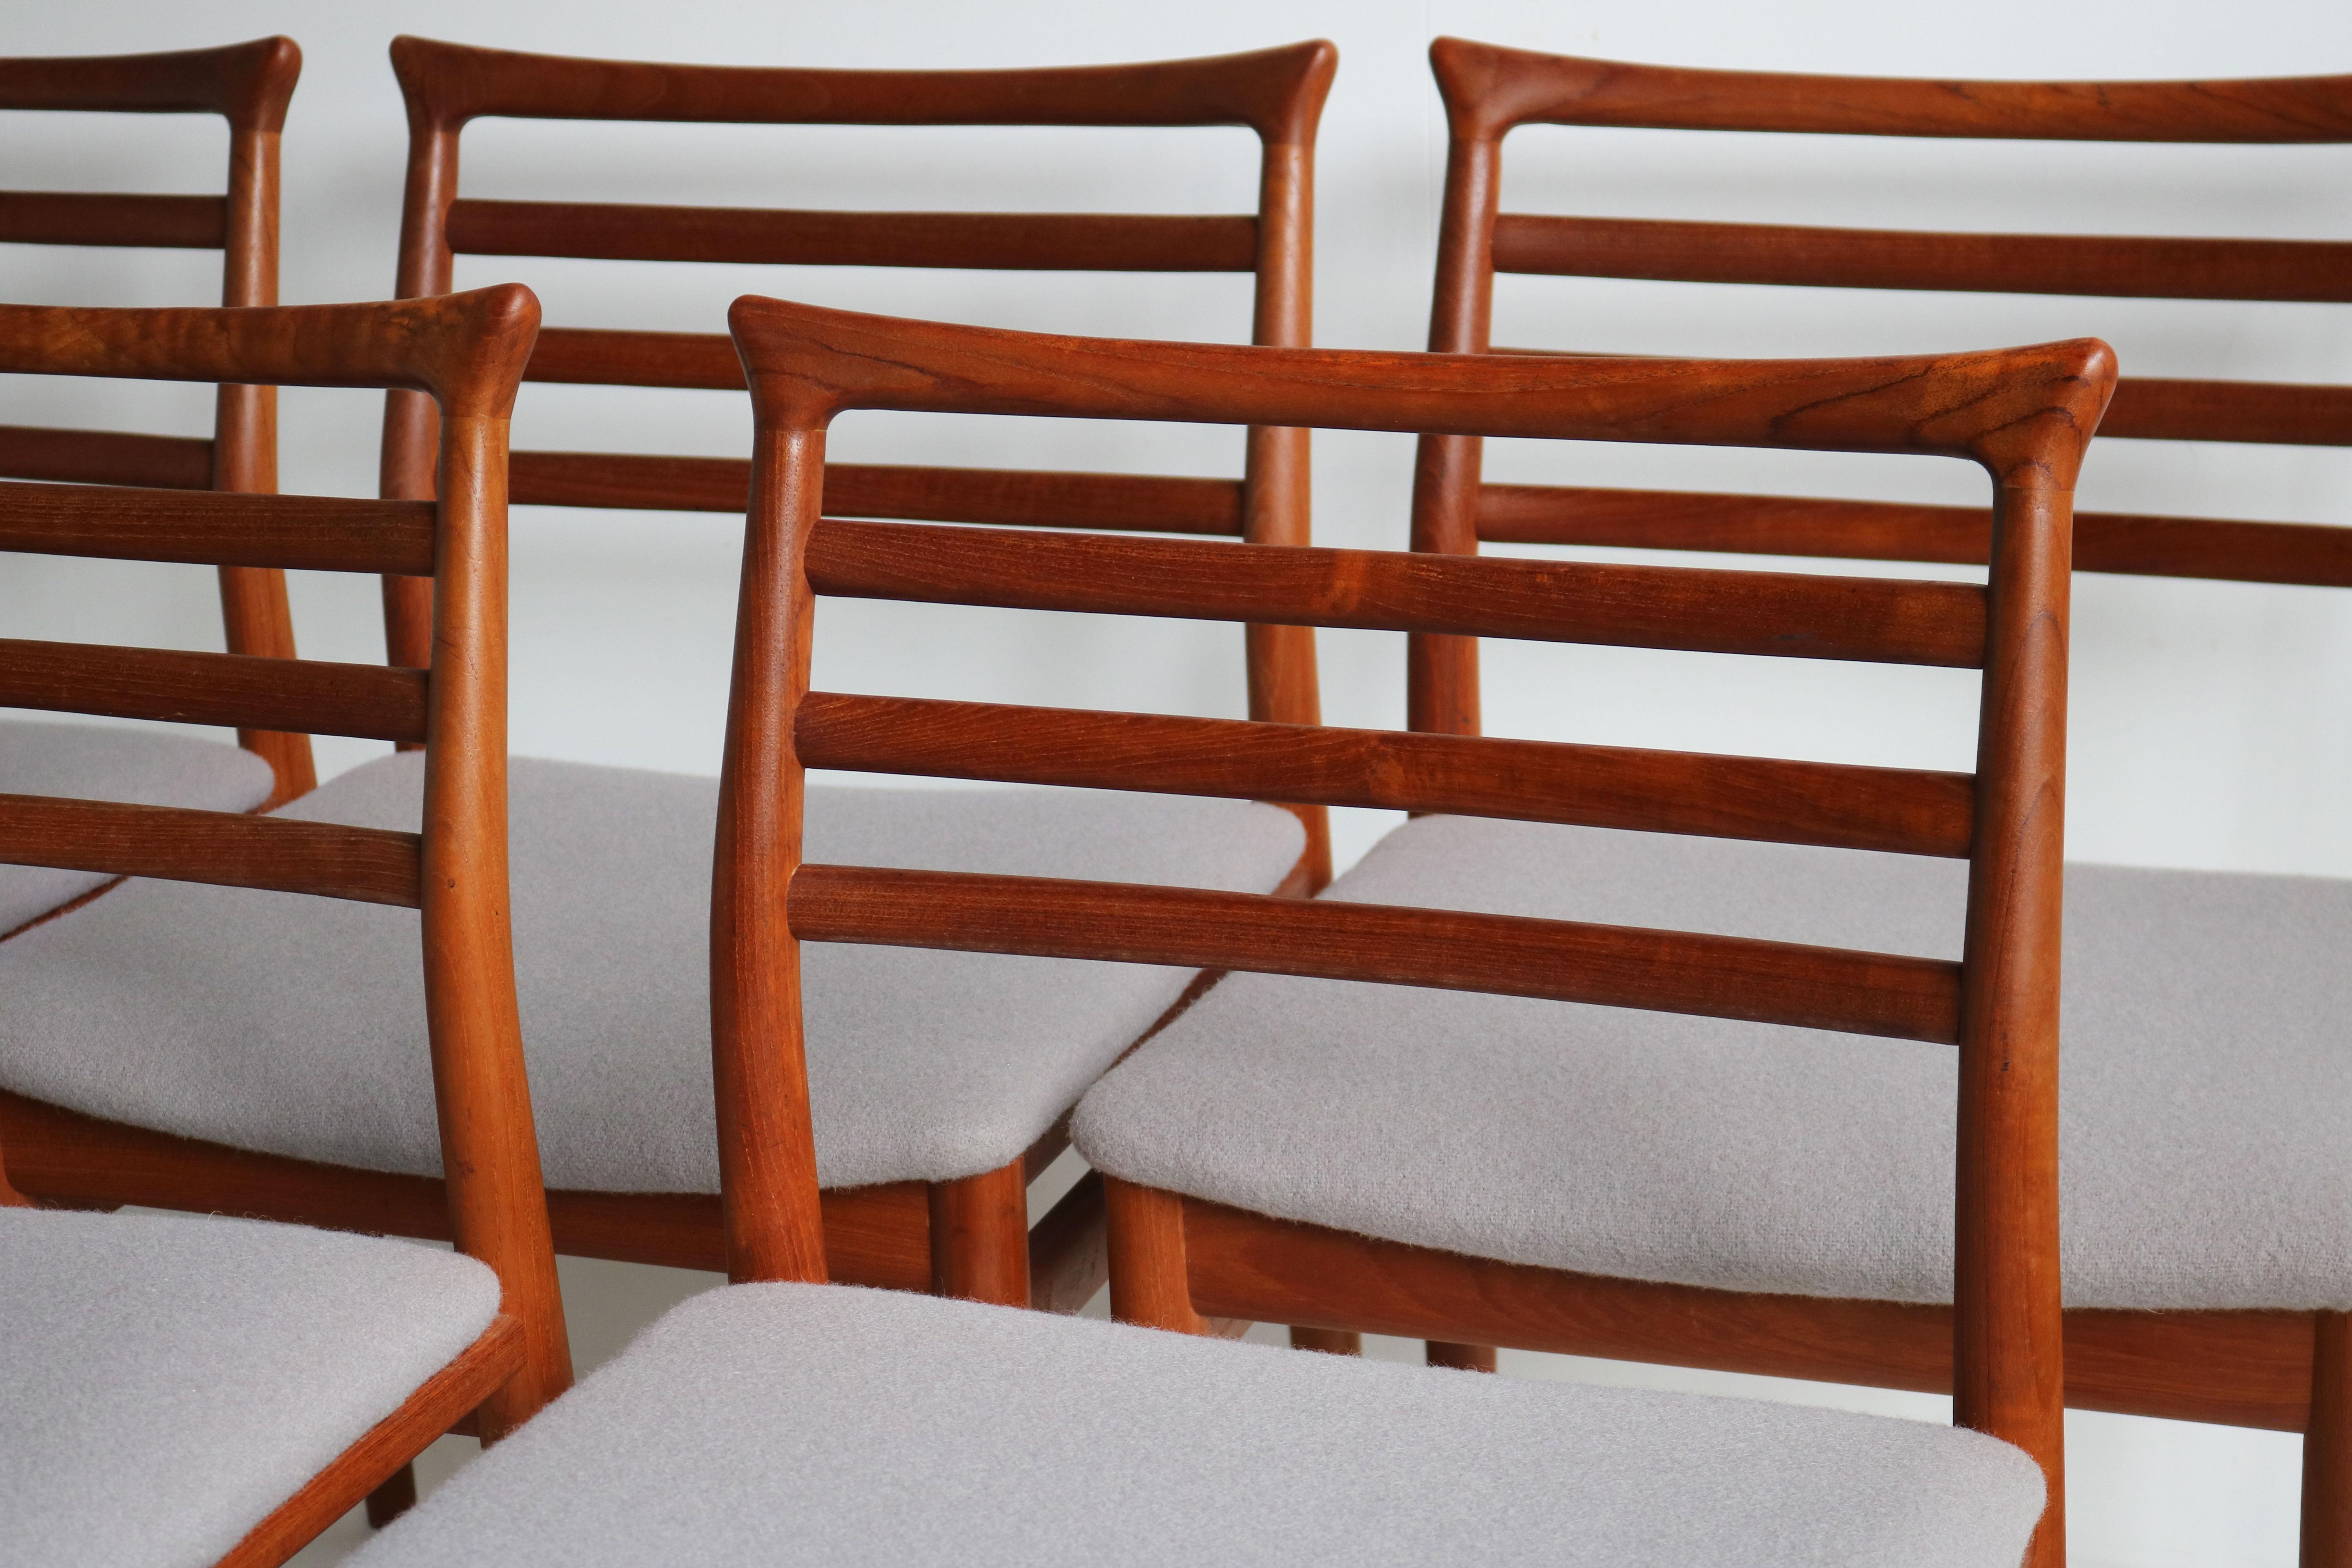 Upgrade your dining area with this stunning set of six Danish design dining chairs by Erling Torvits for the Sorø Stolefabrik in 1960. Crafted from solid teak, these chairs embody the unmatched quality of Danish craftsmanship and are a true